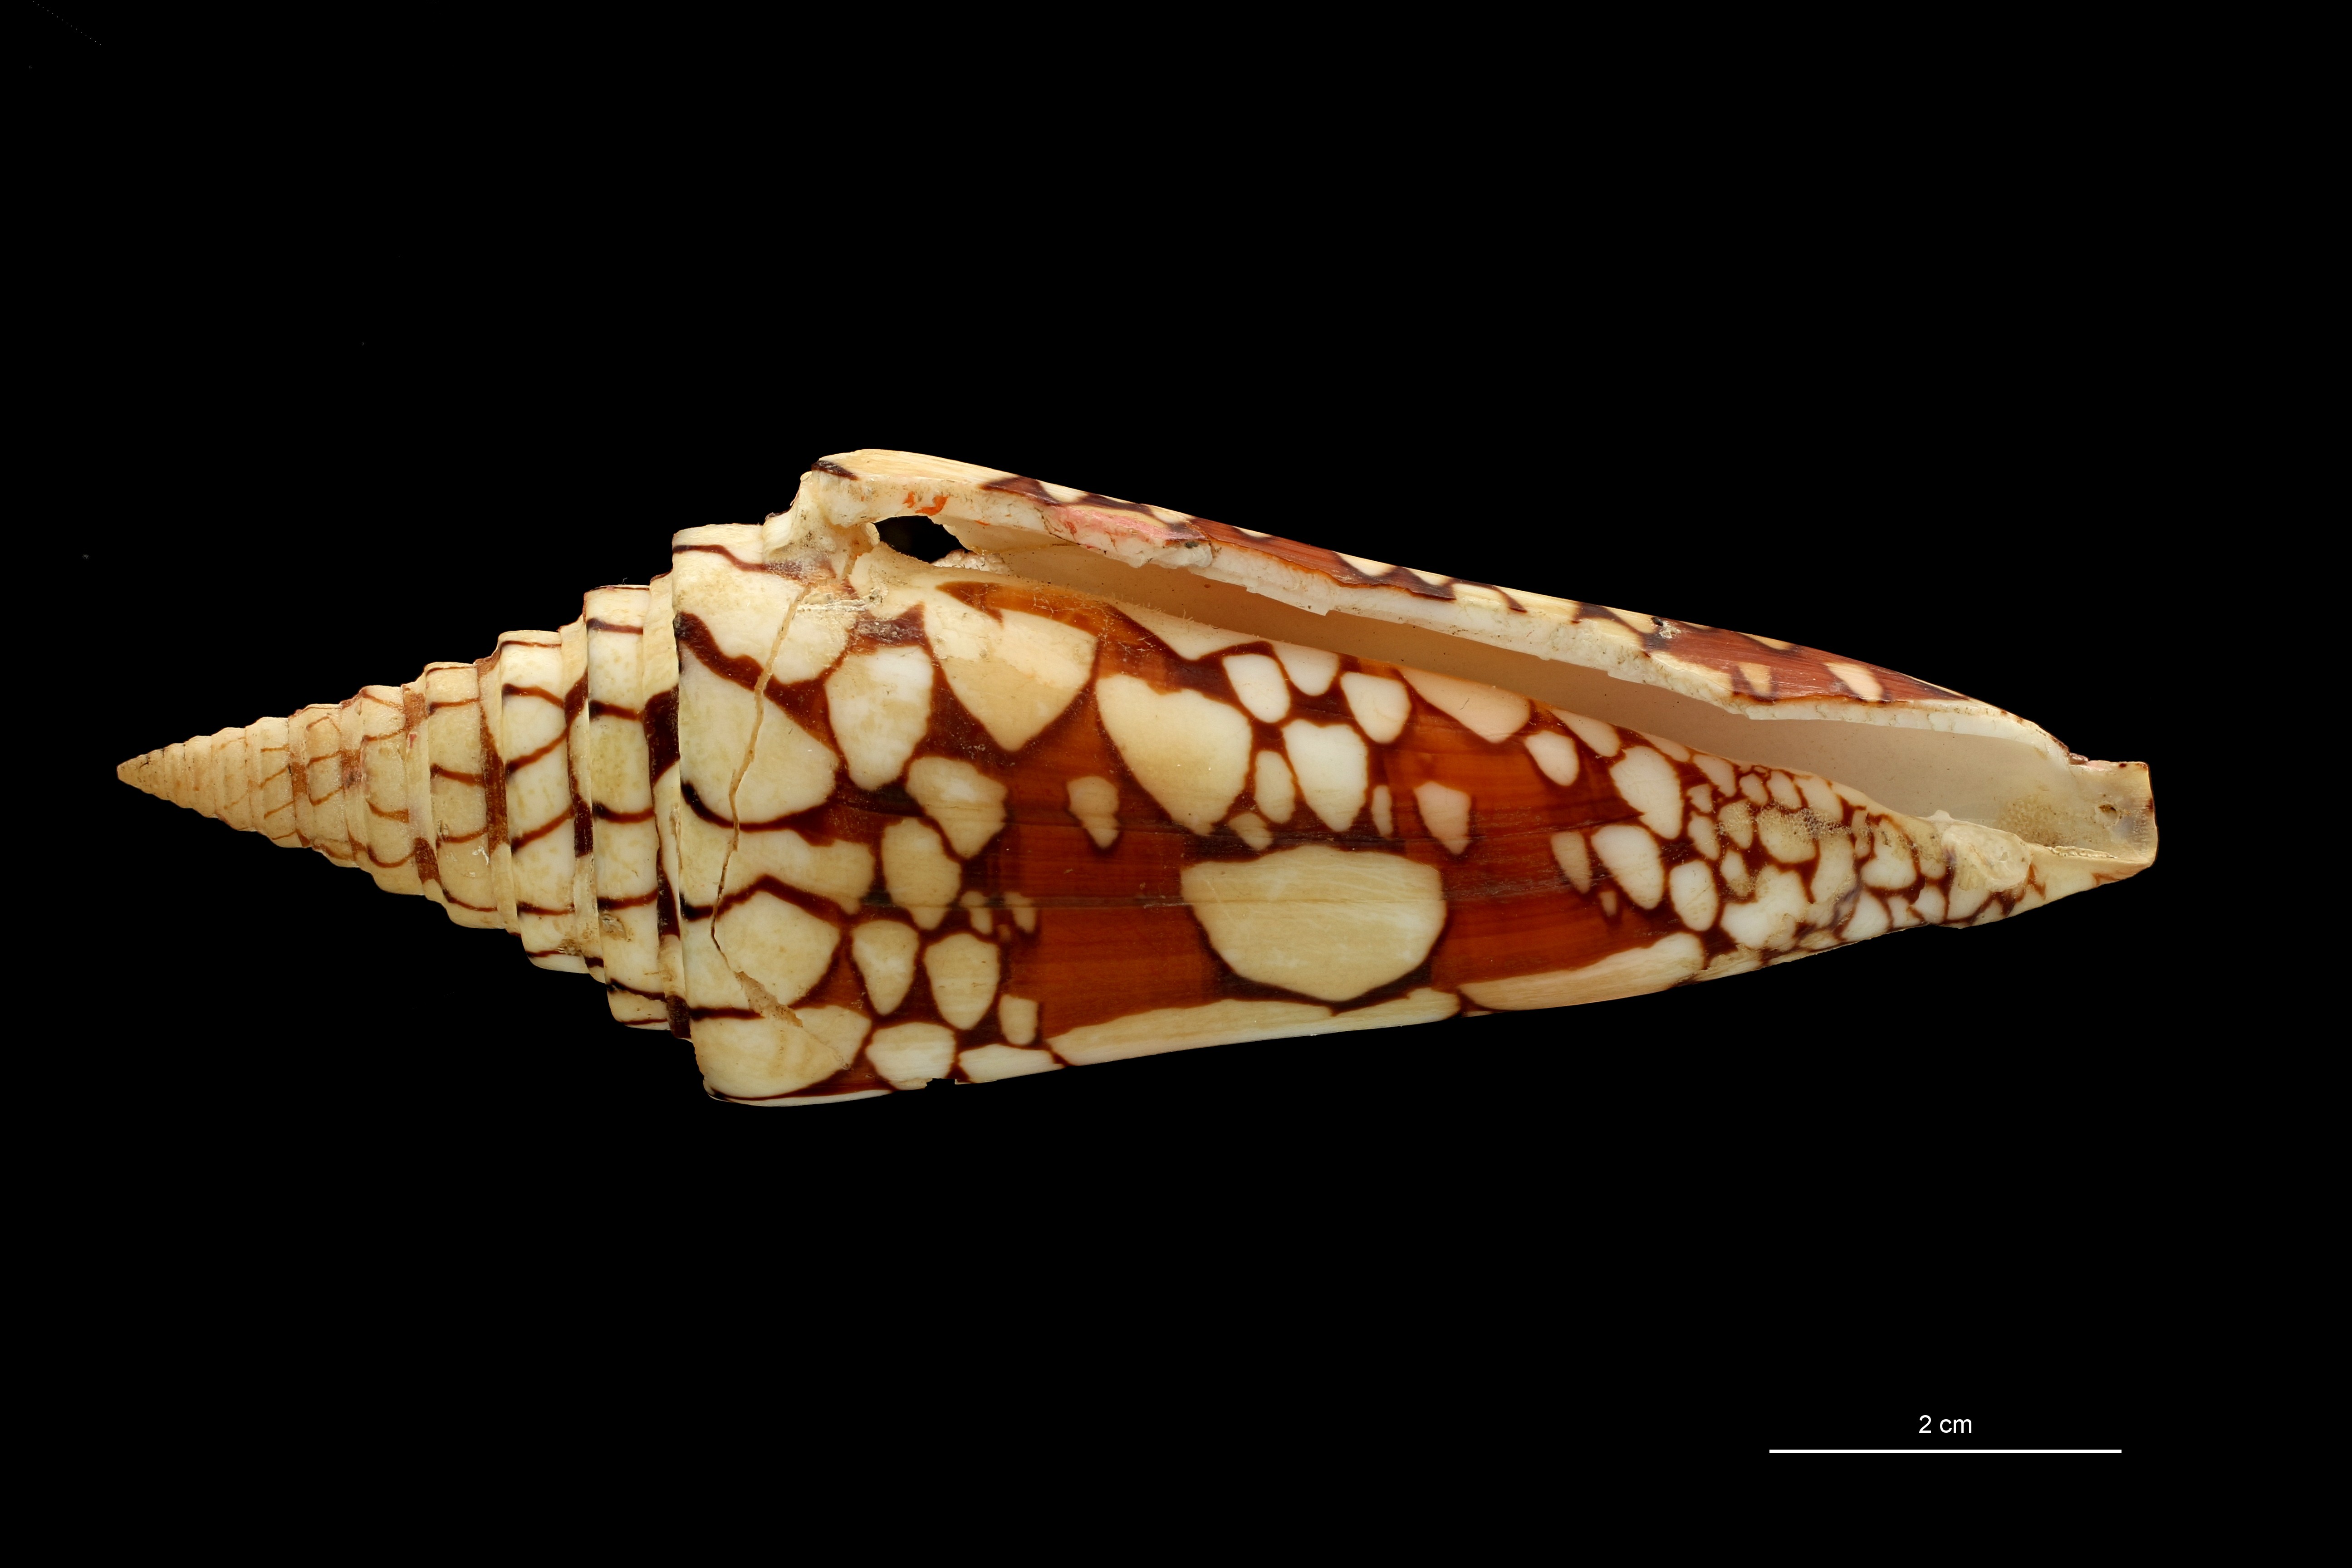 BE-RBINS-INV HOLOTYPE MT 448/1 Conus lemuriensis VENTRAL ZS PMax Scaled.jpg